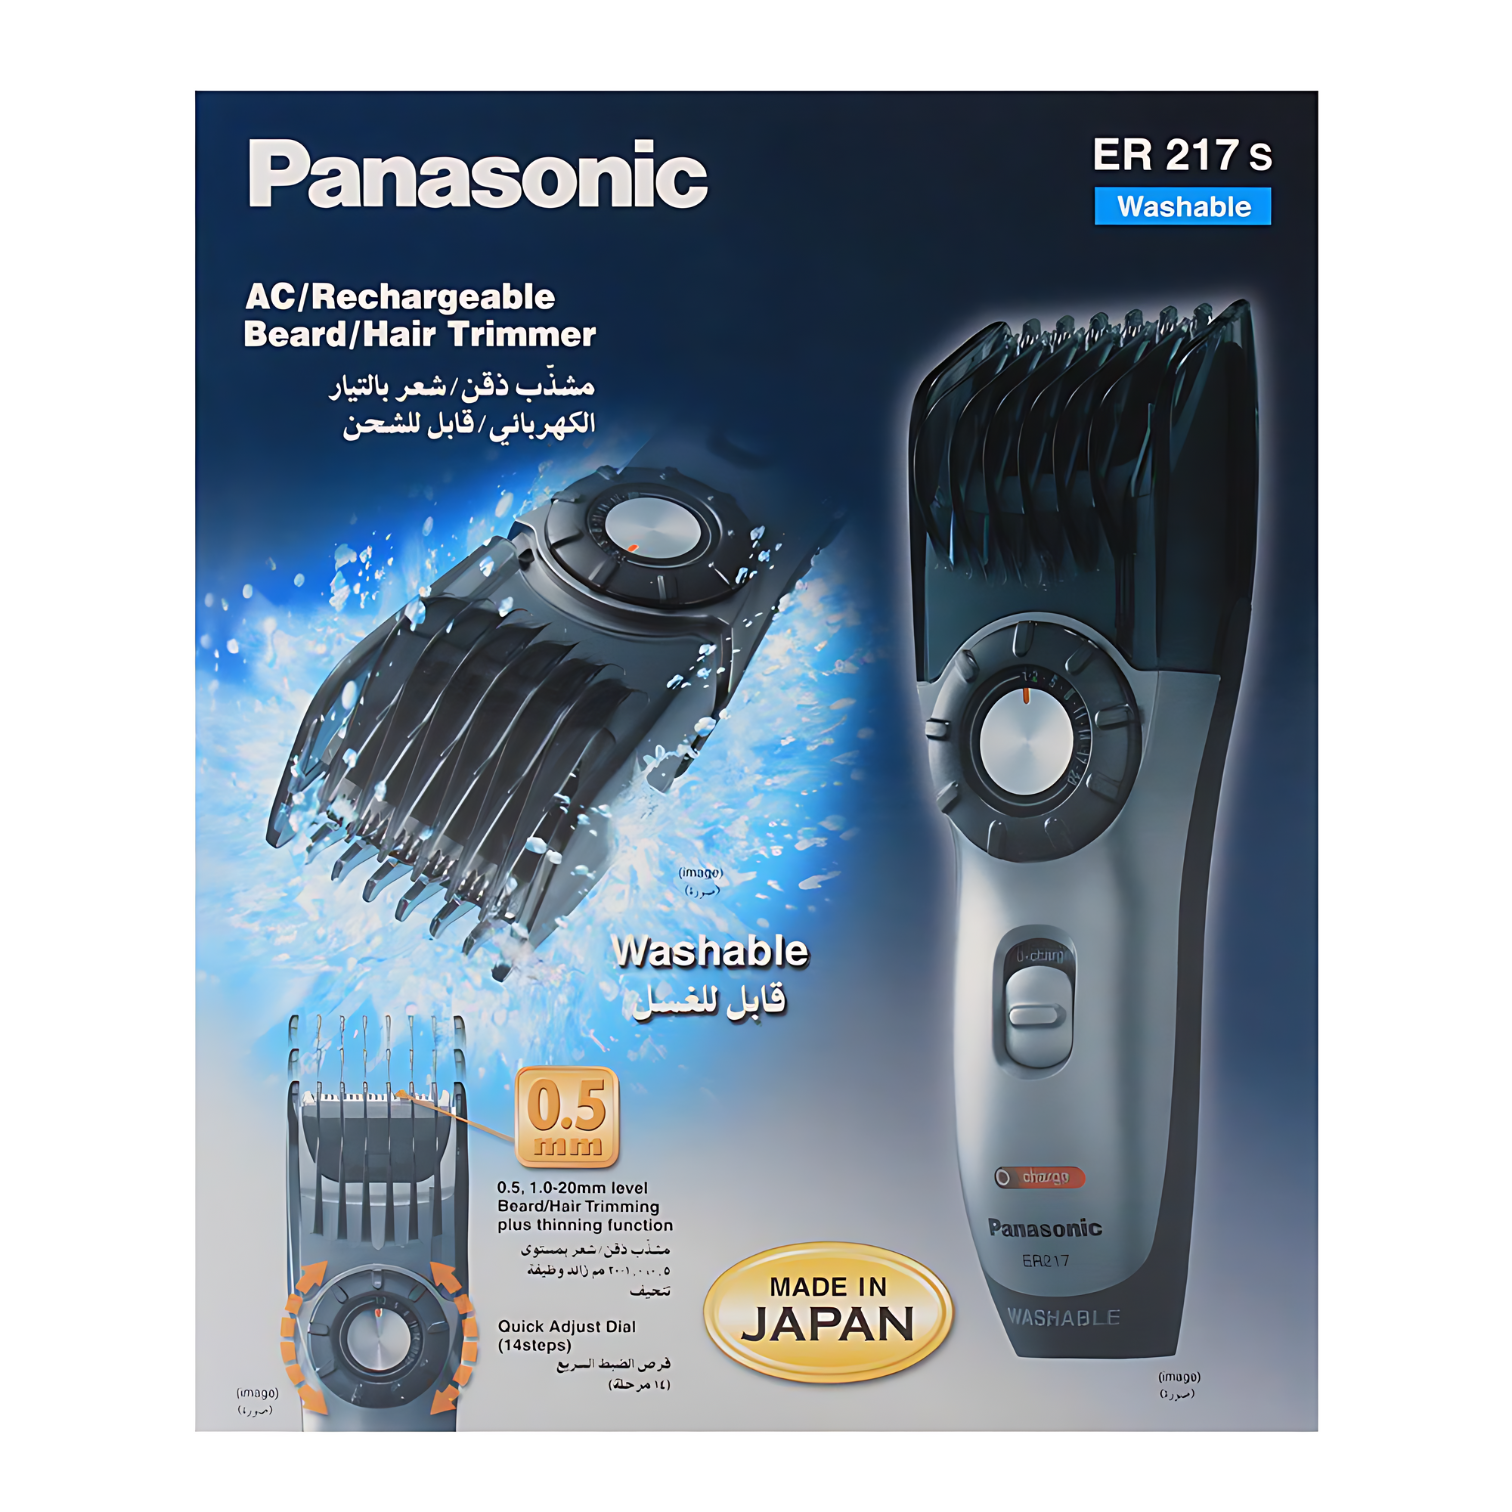 Panasonic Washable Hair and Beard Trimmer ER-217 S - Convenient and Precise Trimming for Hair and Beard